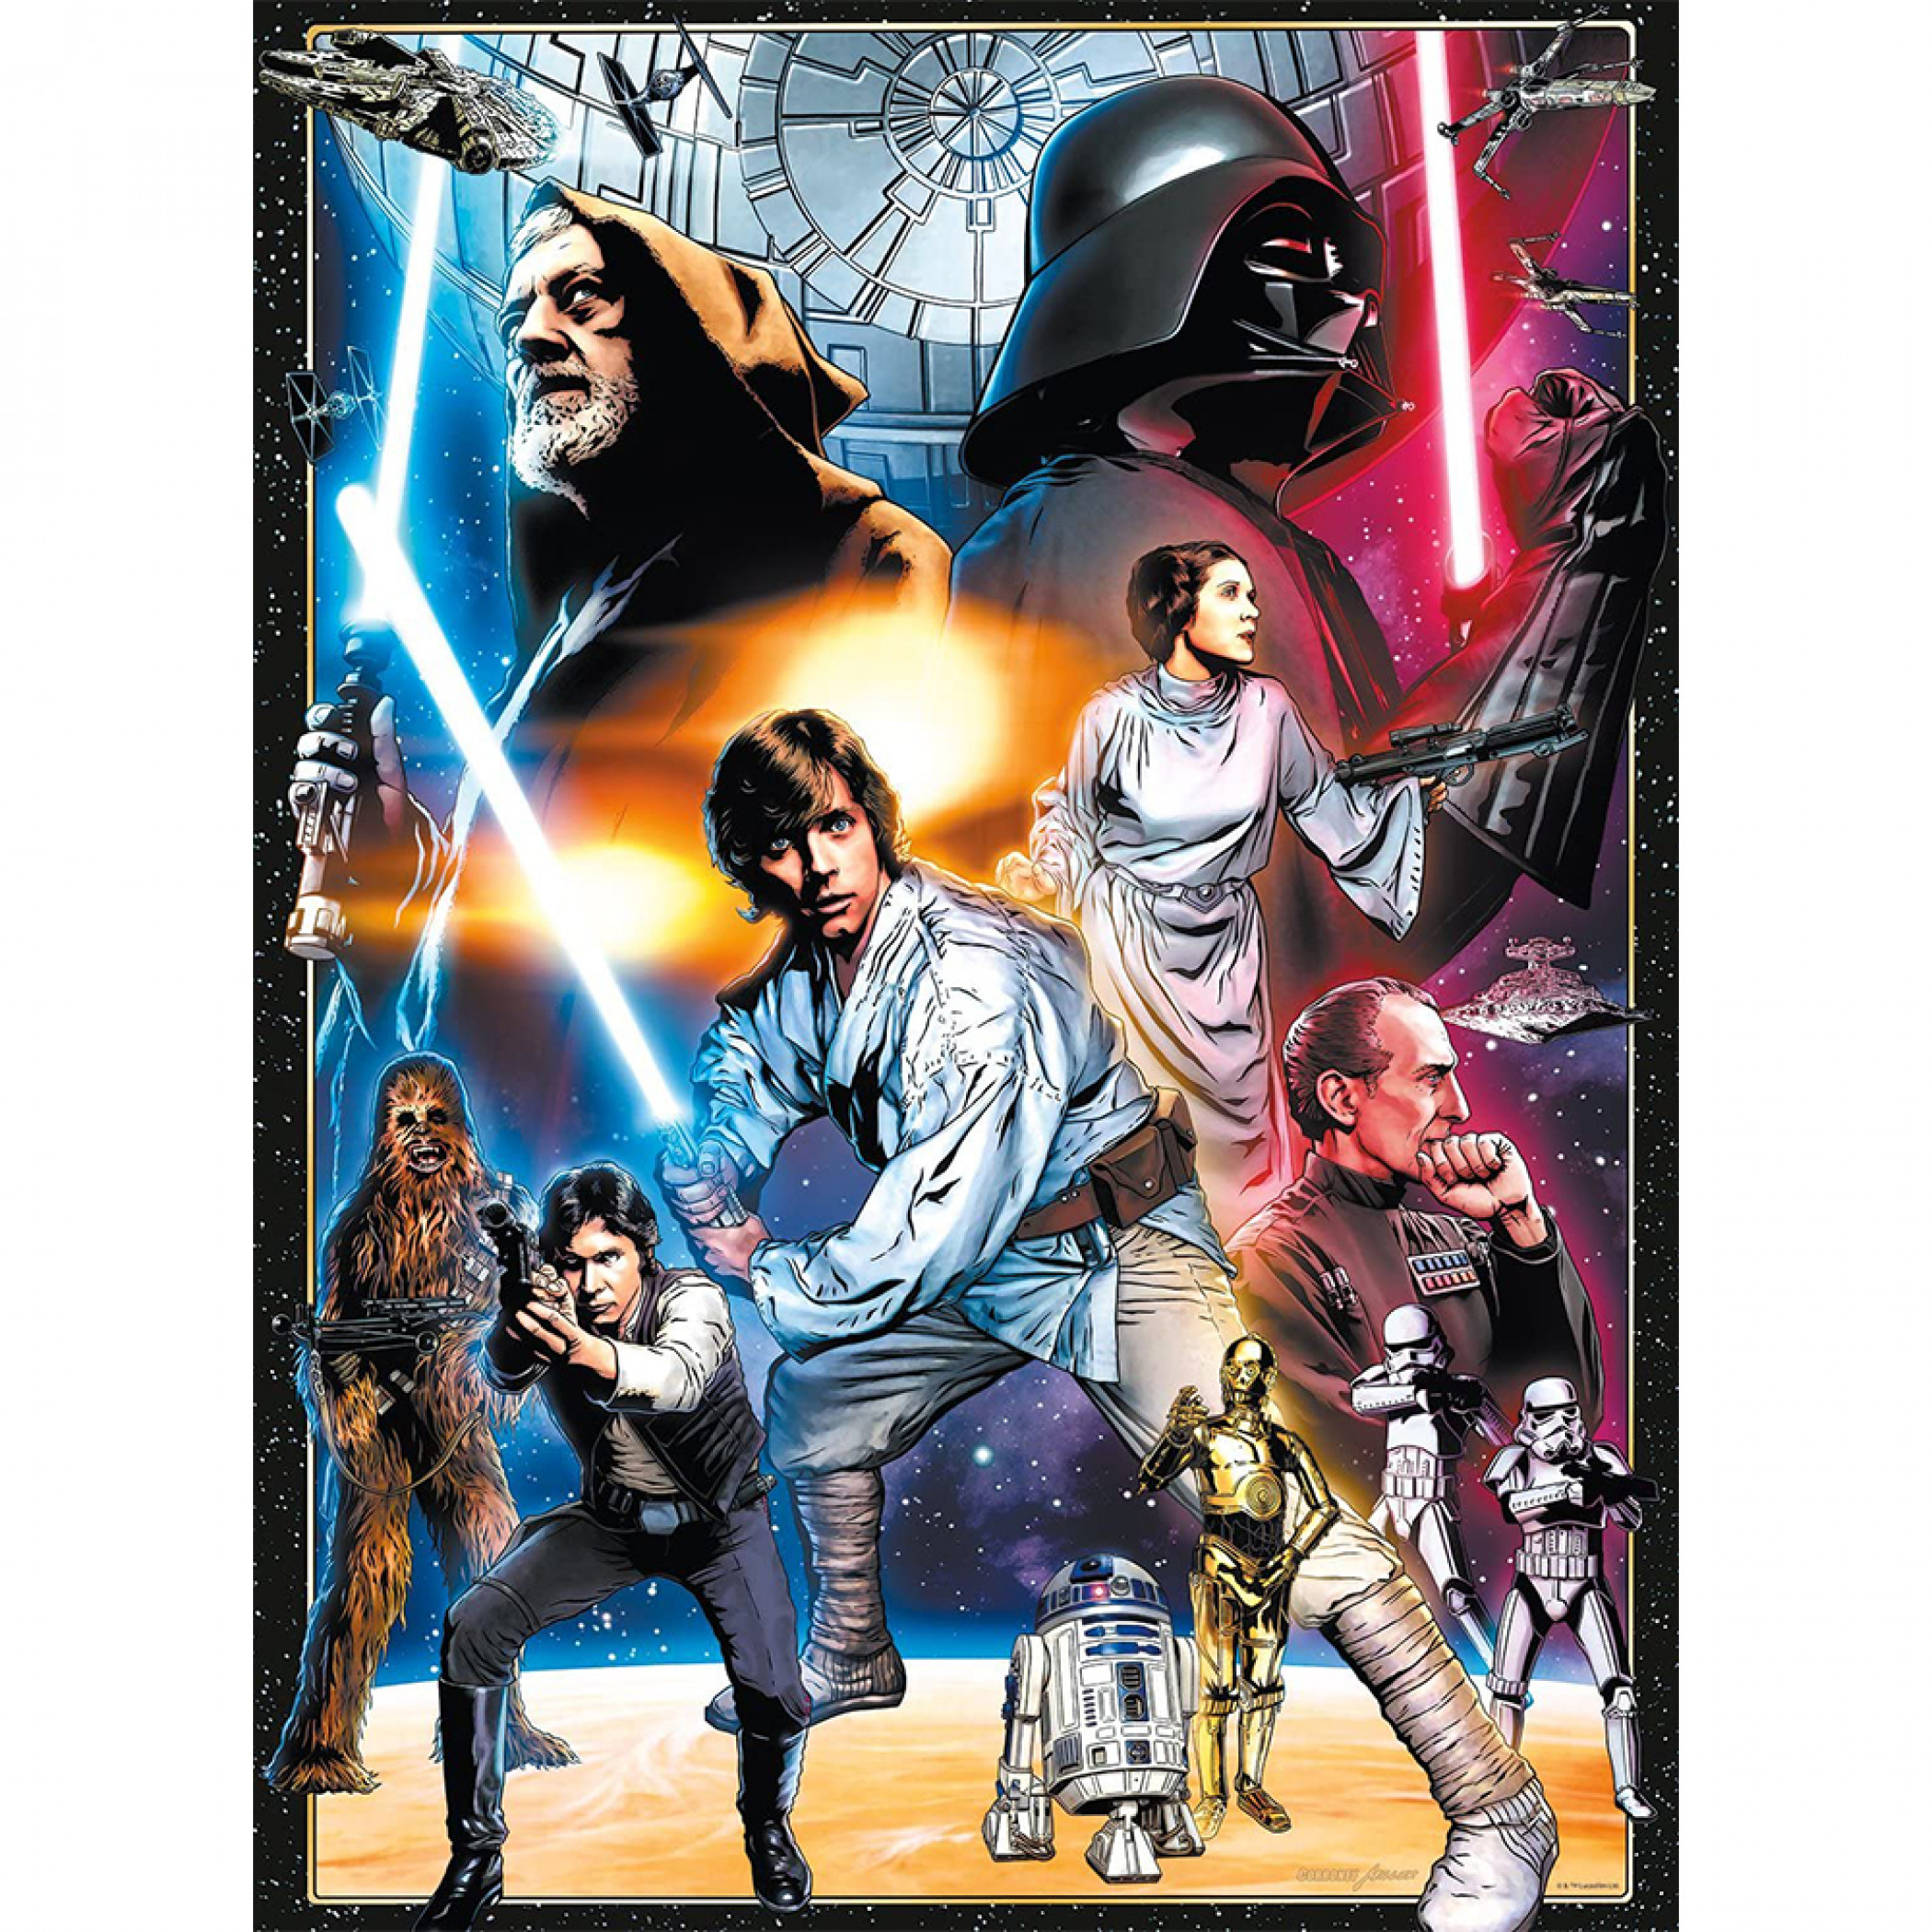 Star Wars A New Hope Collage 1000 Piece Jigsaw Puzzle